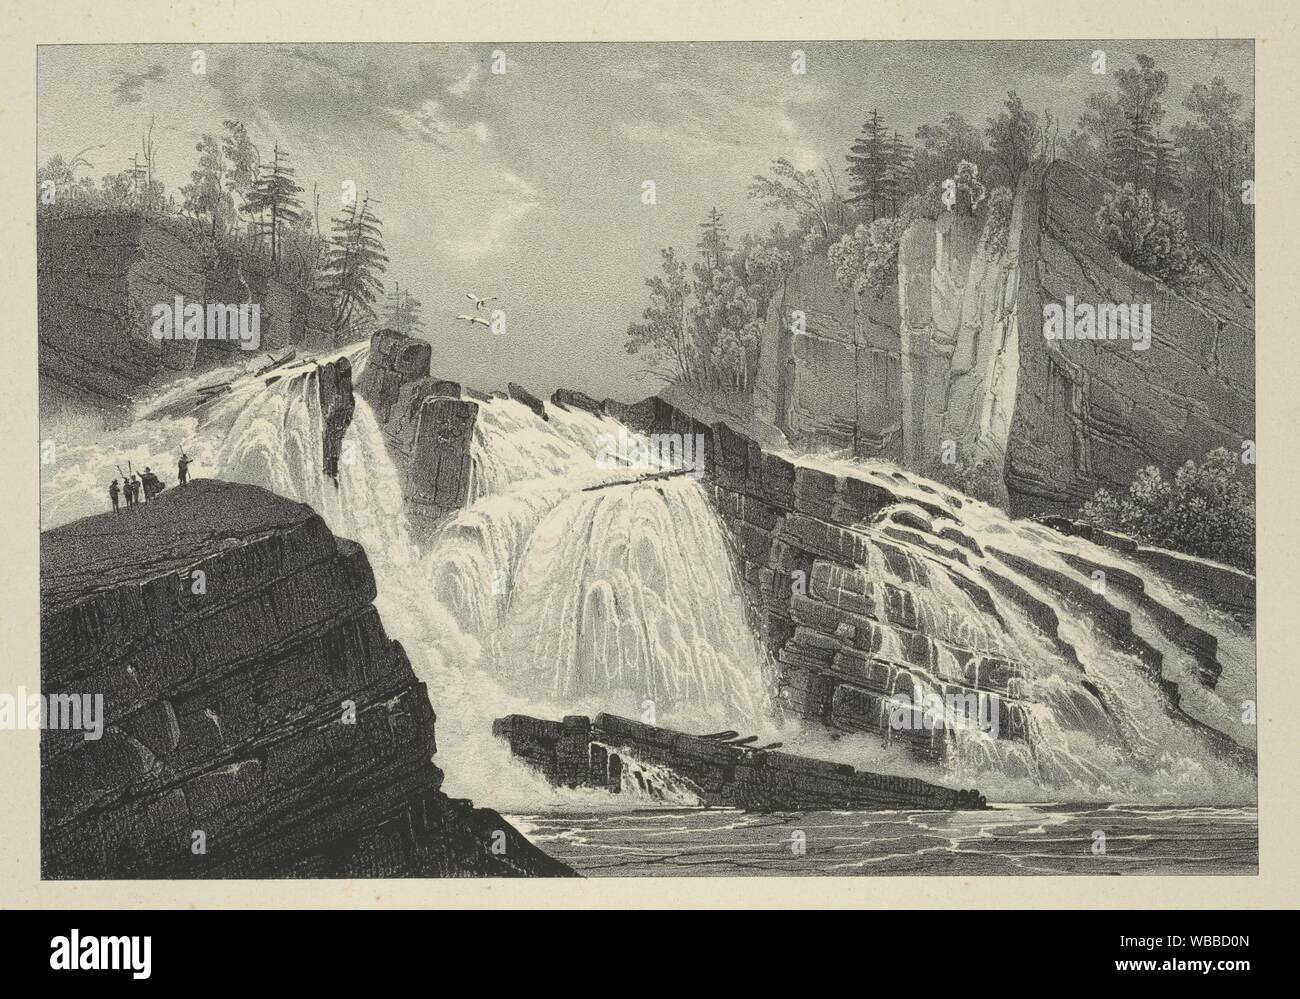 Extremity of Adley's Falls Additional title: Itinéraire pittoresque du fleuve Hudson. Eno, Amos F., 1836-1915 (Collector) Milbert, Jacques Gérard Stock Photo